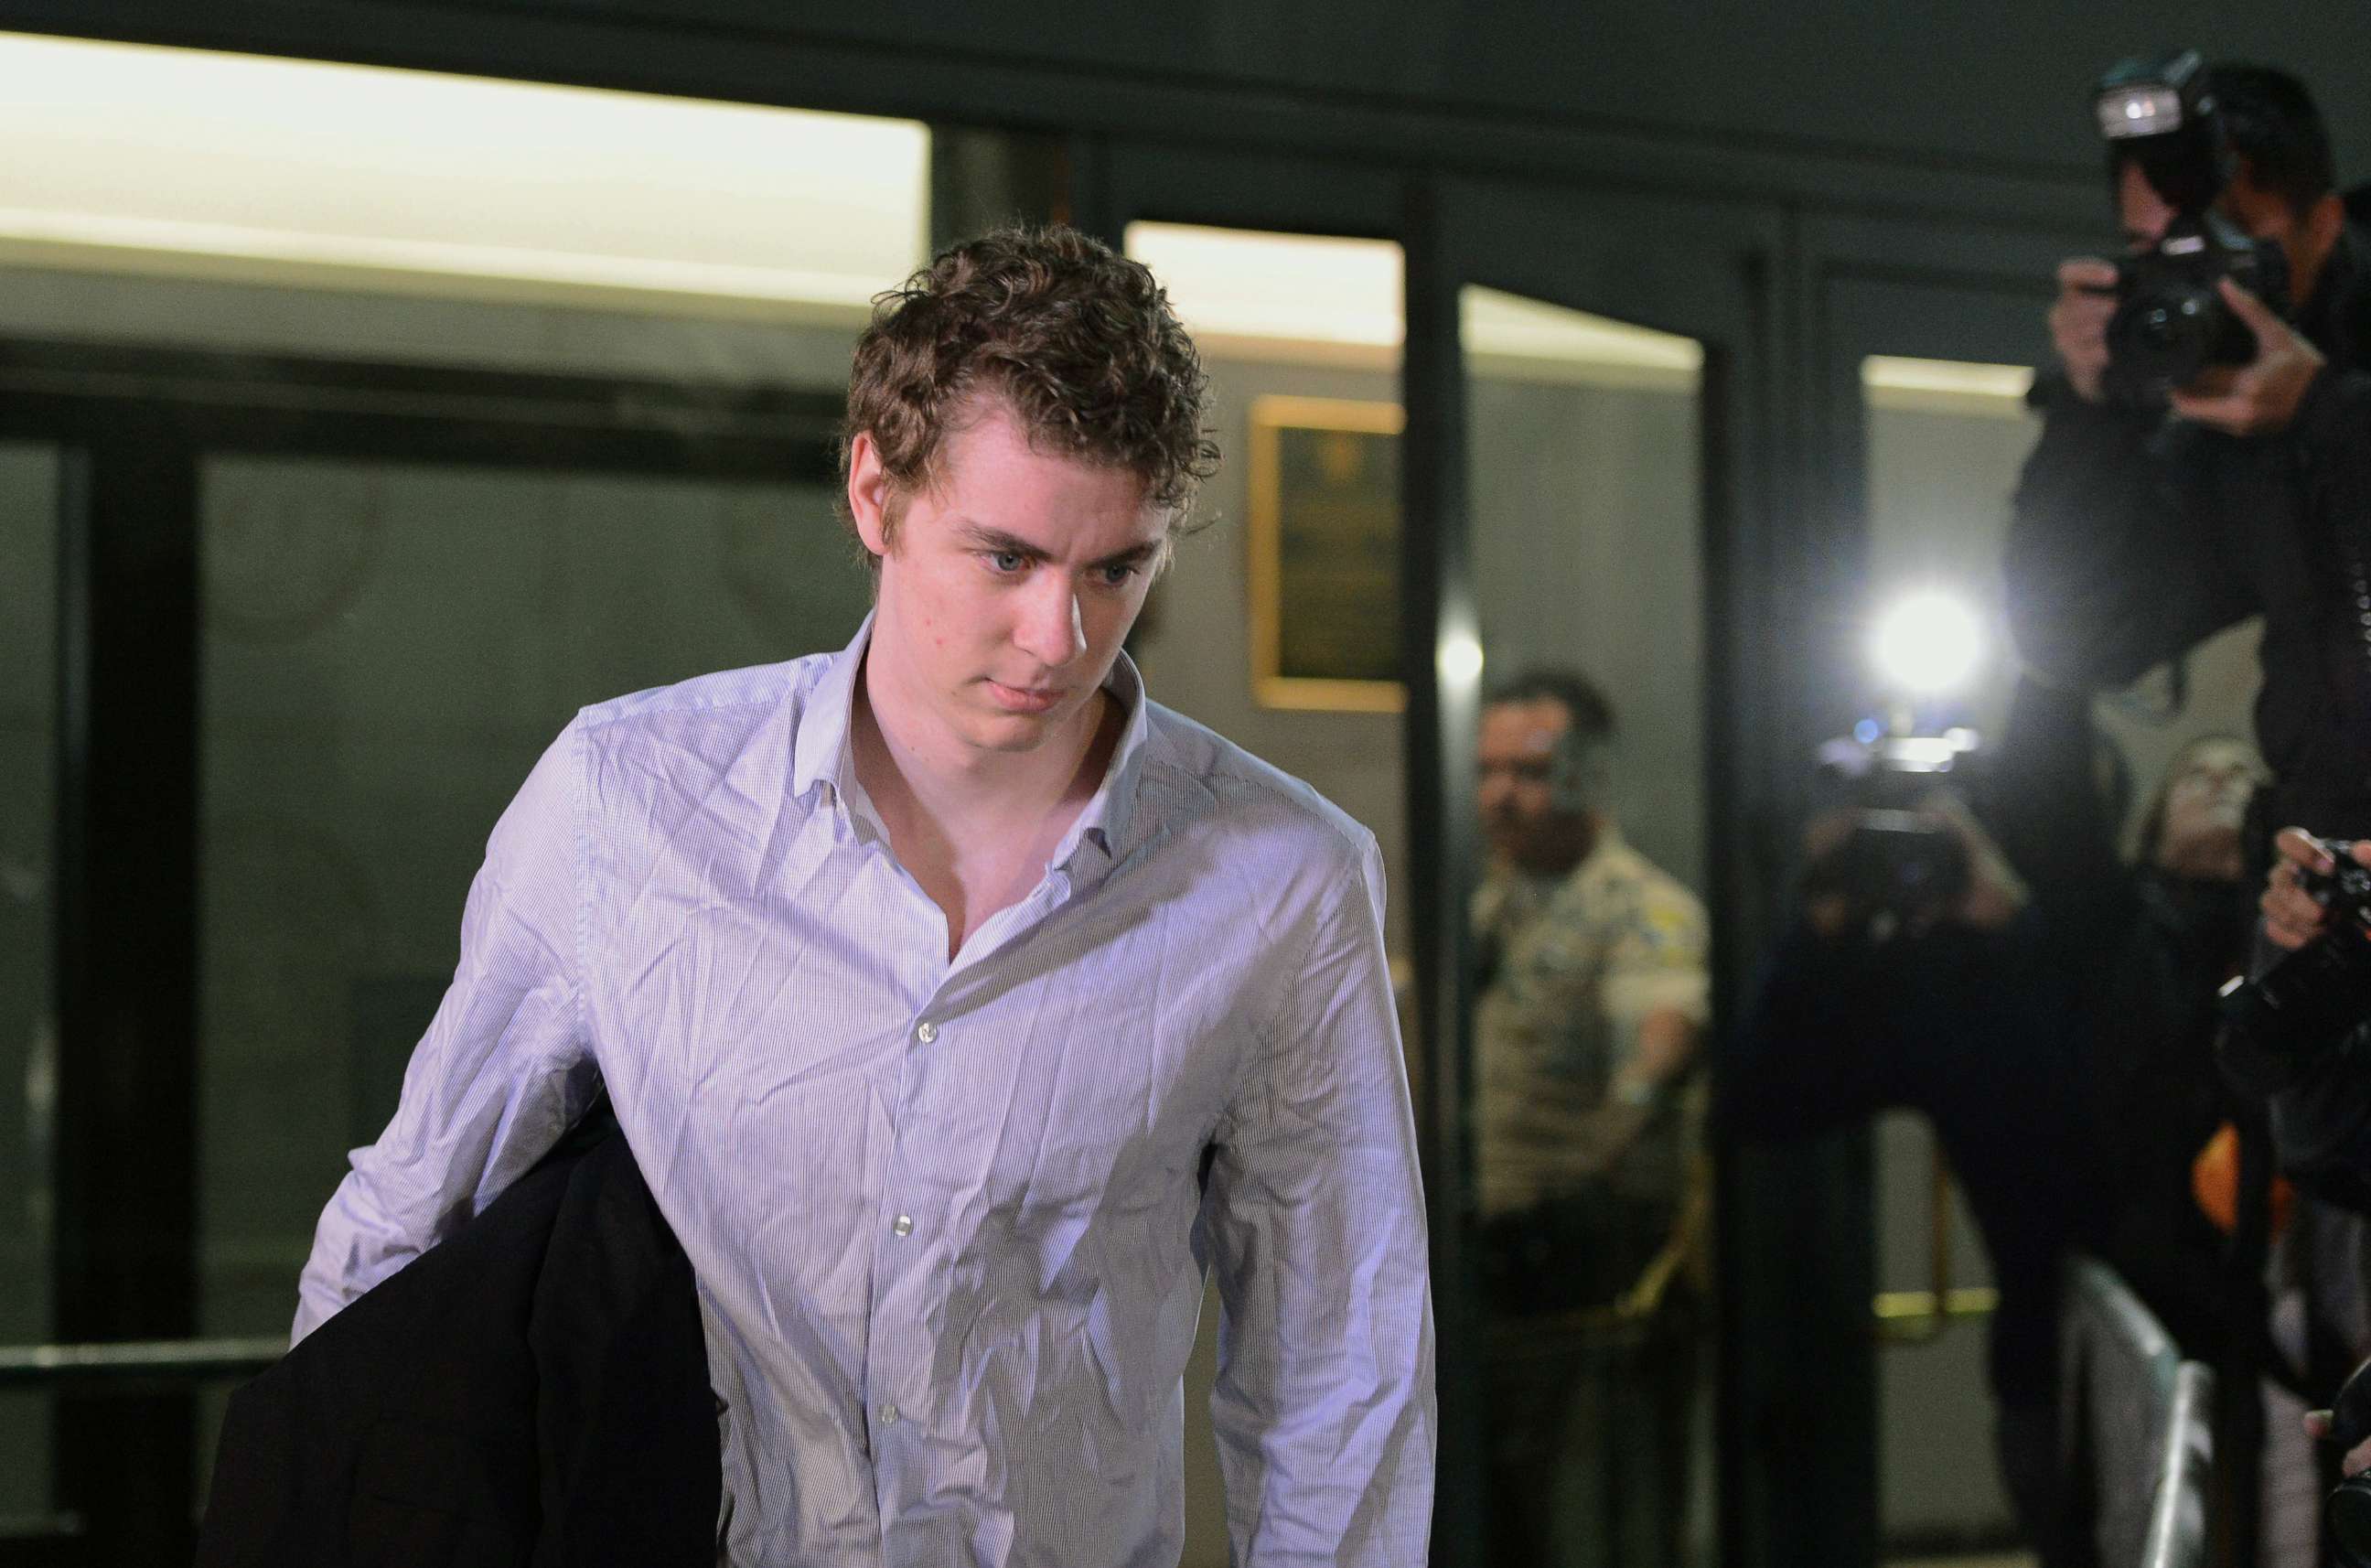 Attorney for former Stanford swimmer Brock Turner makes 'outercourse